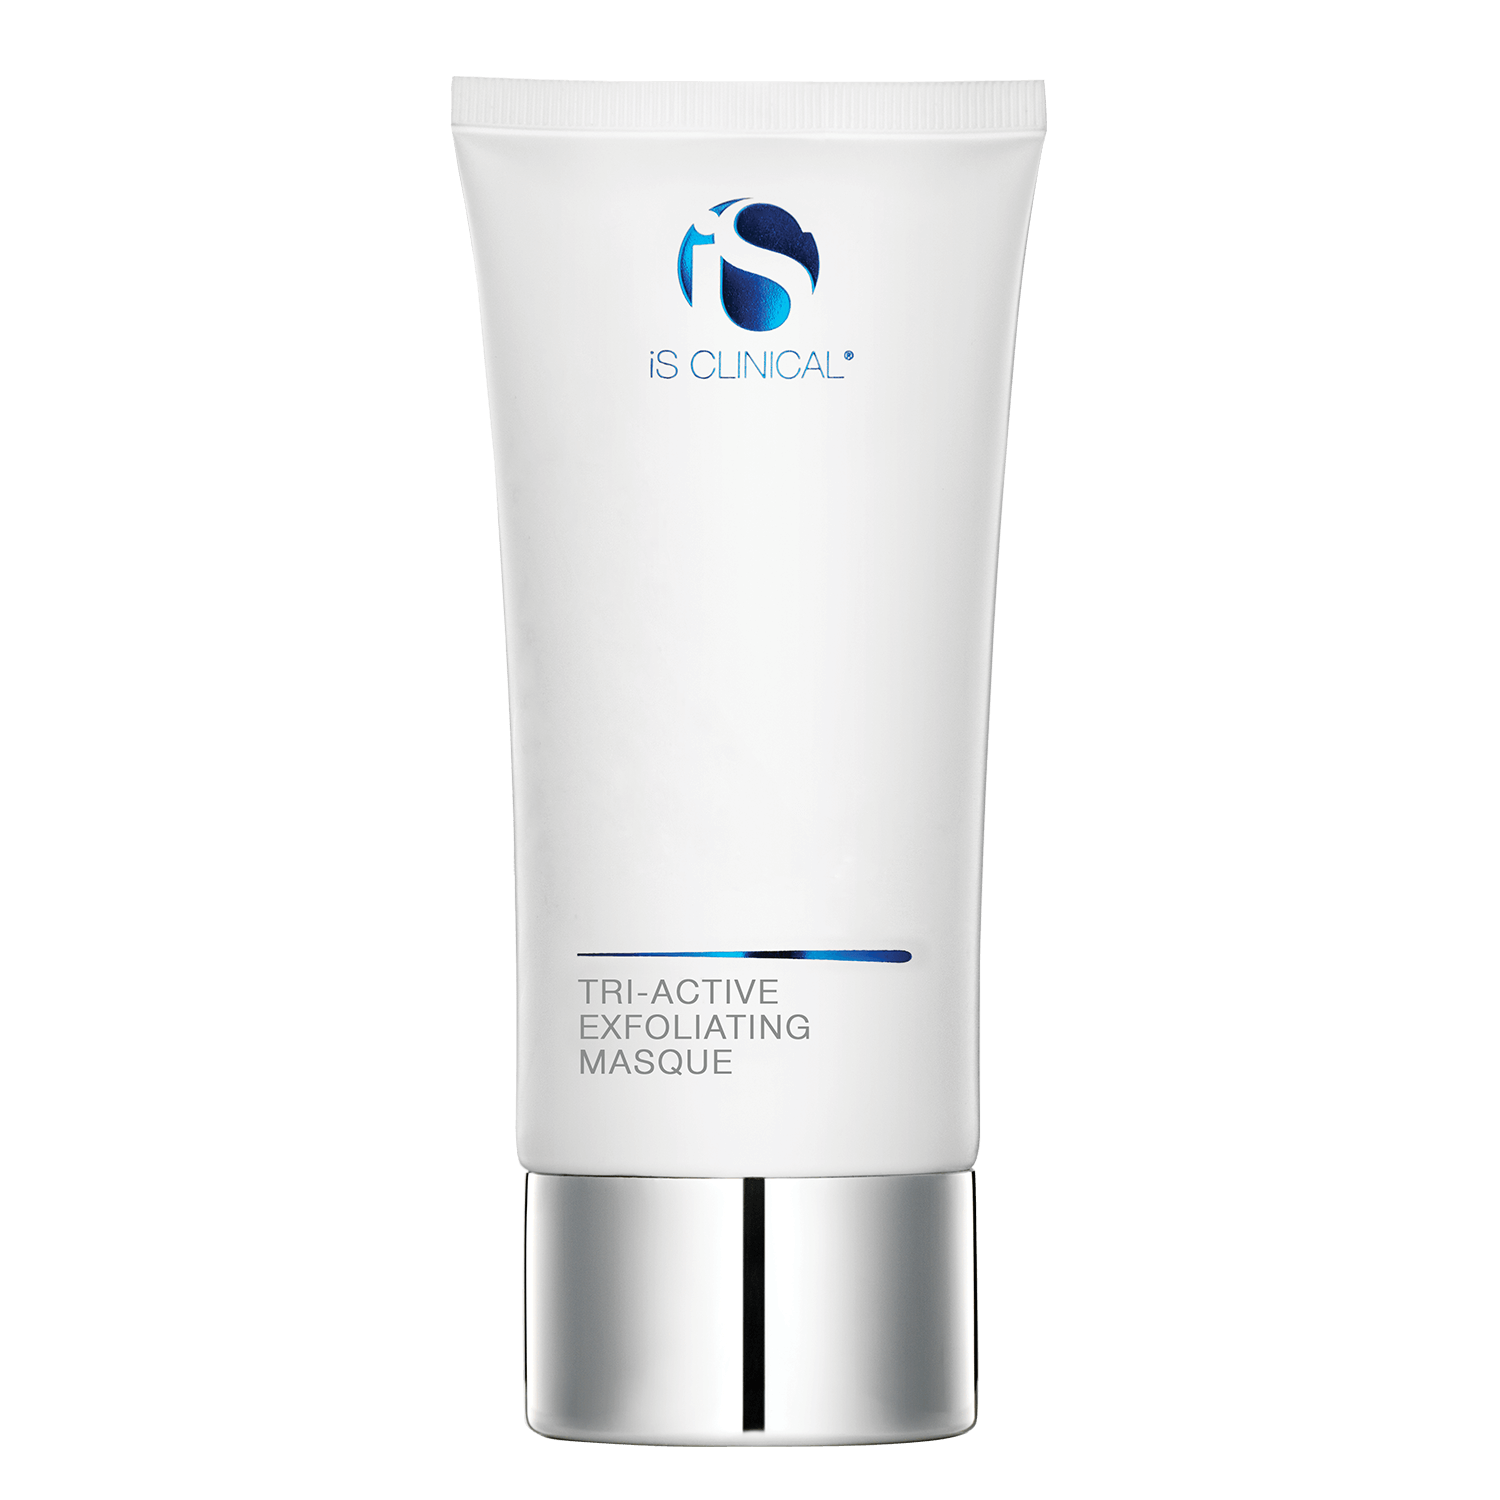 is clinical tri-active exfoliating masque